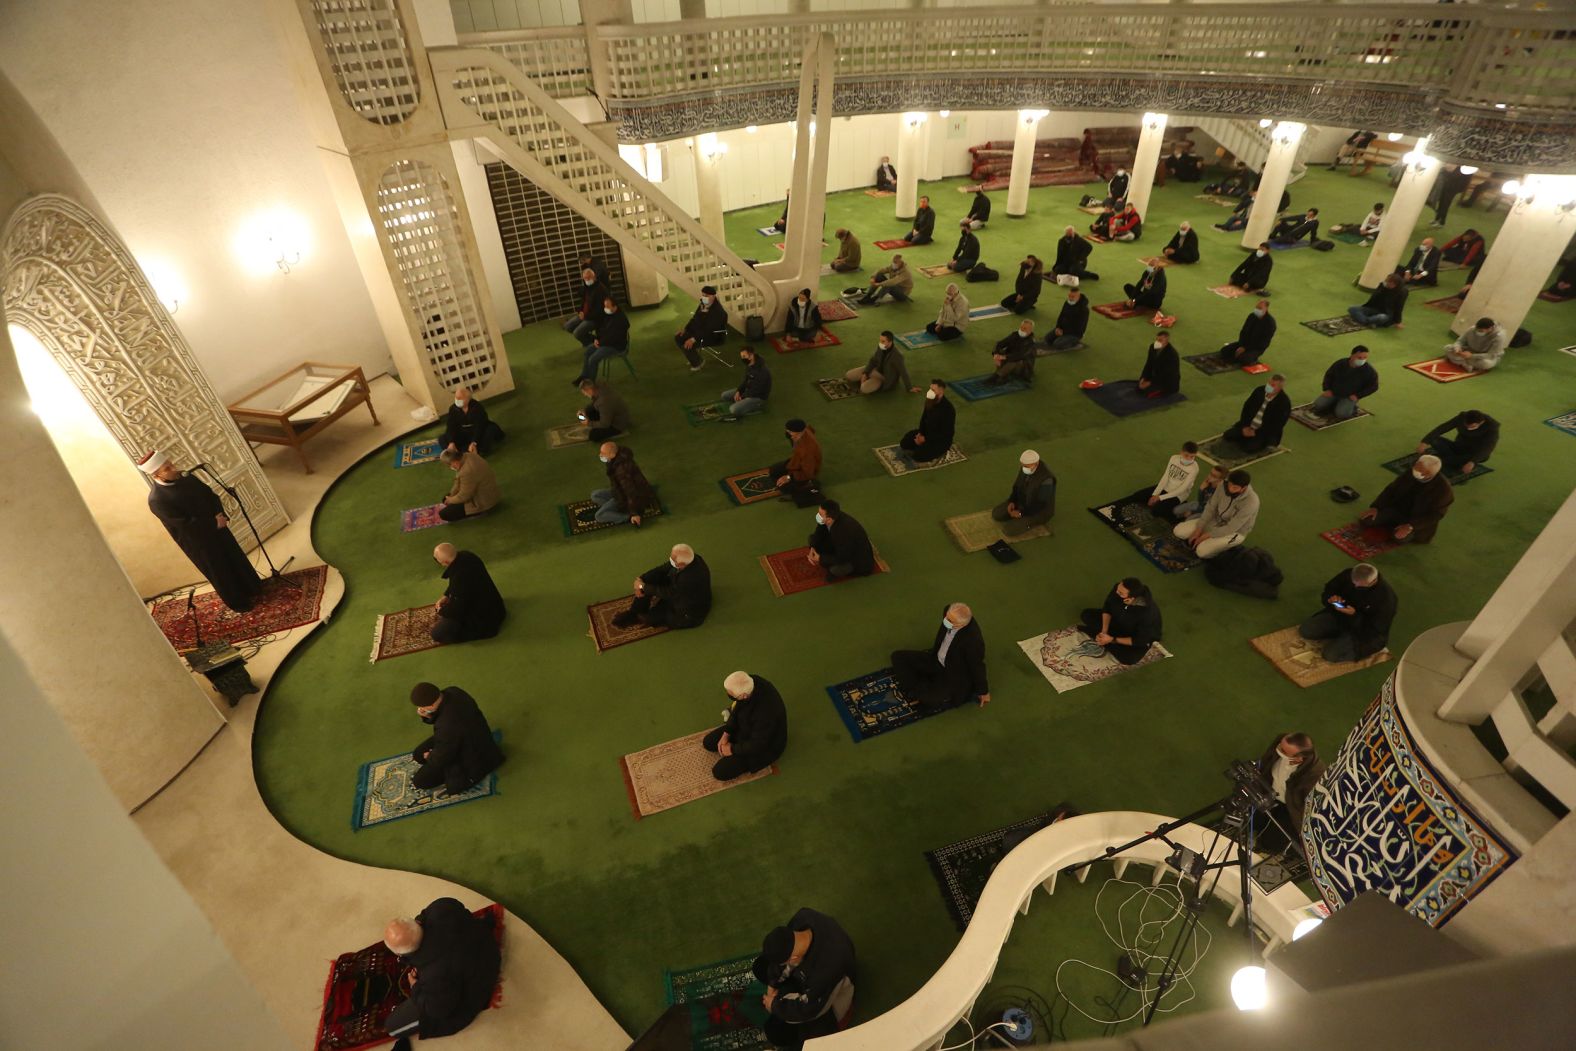 People spread out as they pray at a mosque in Zagreb, Croatia.